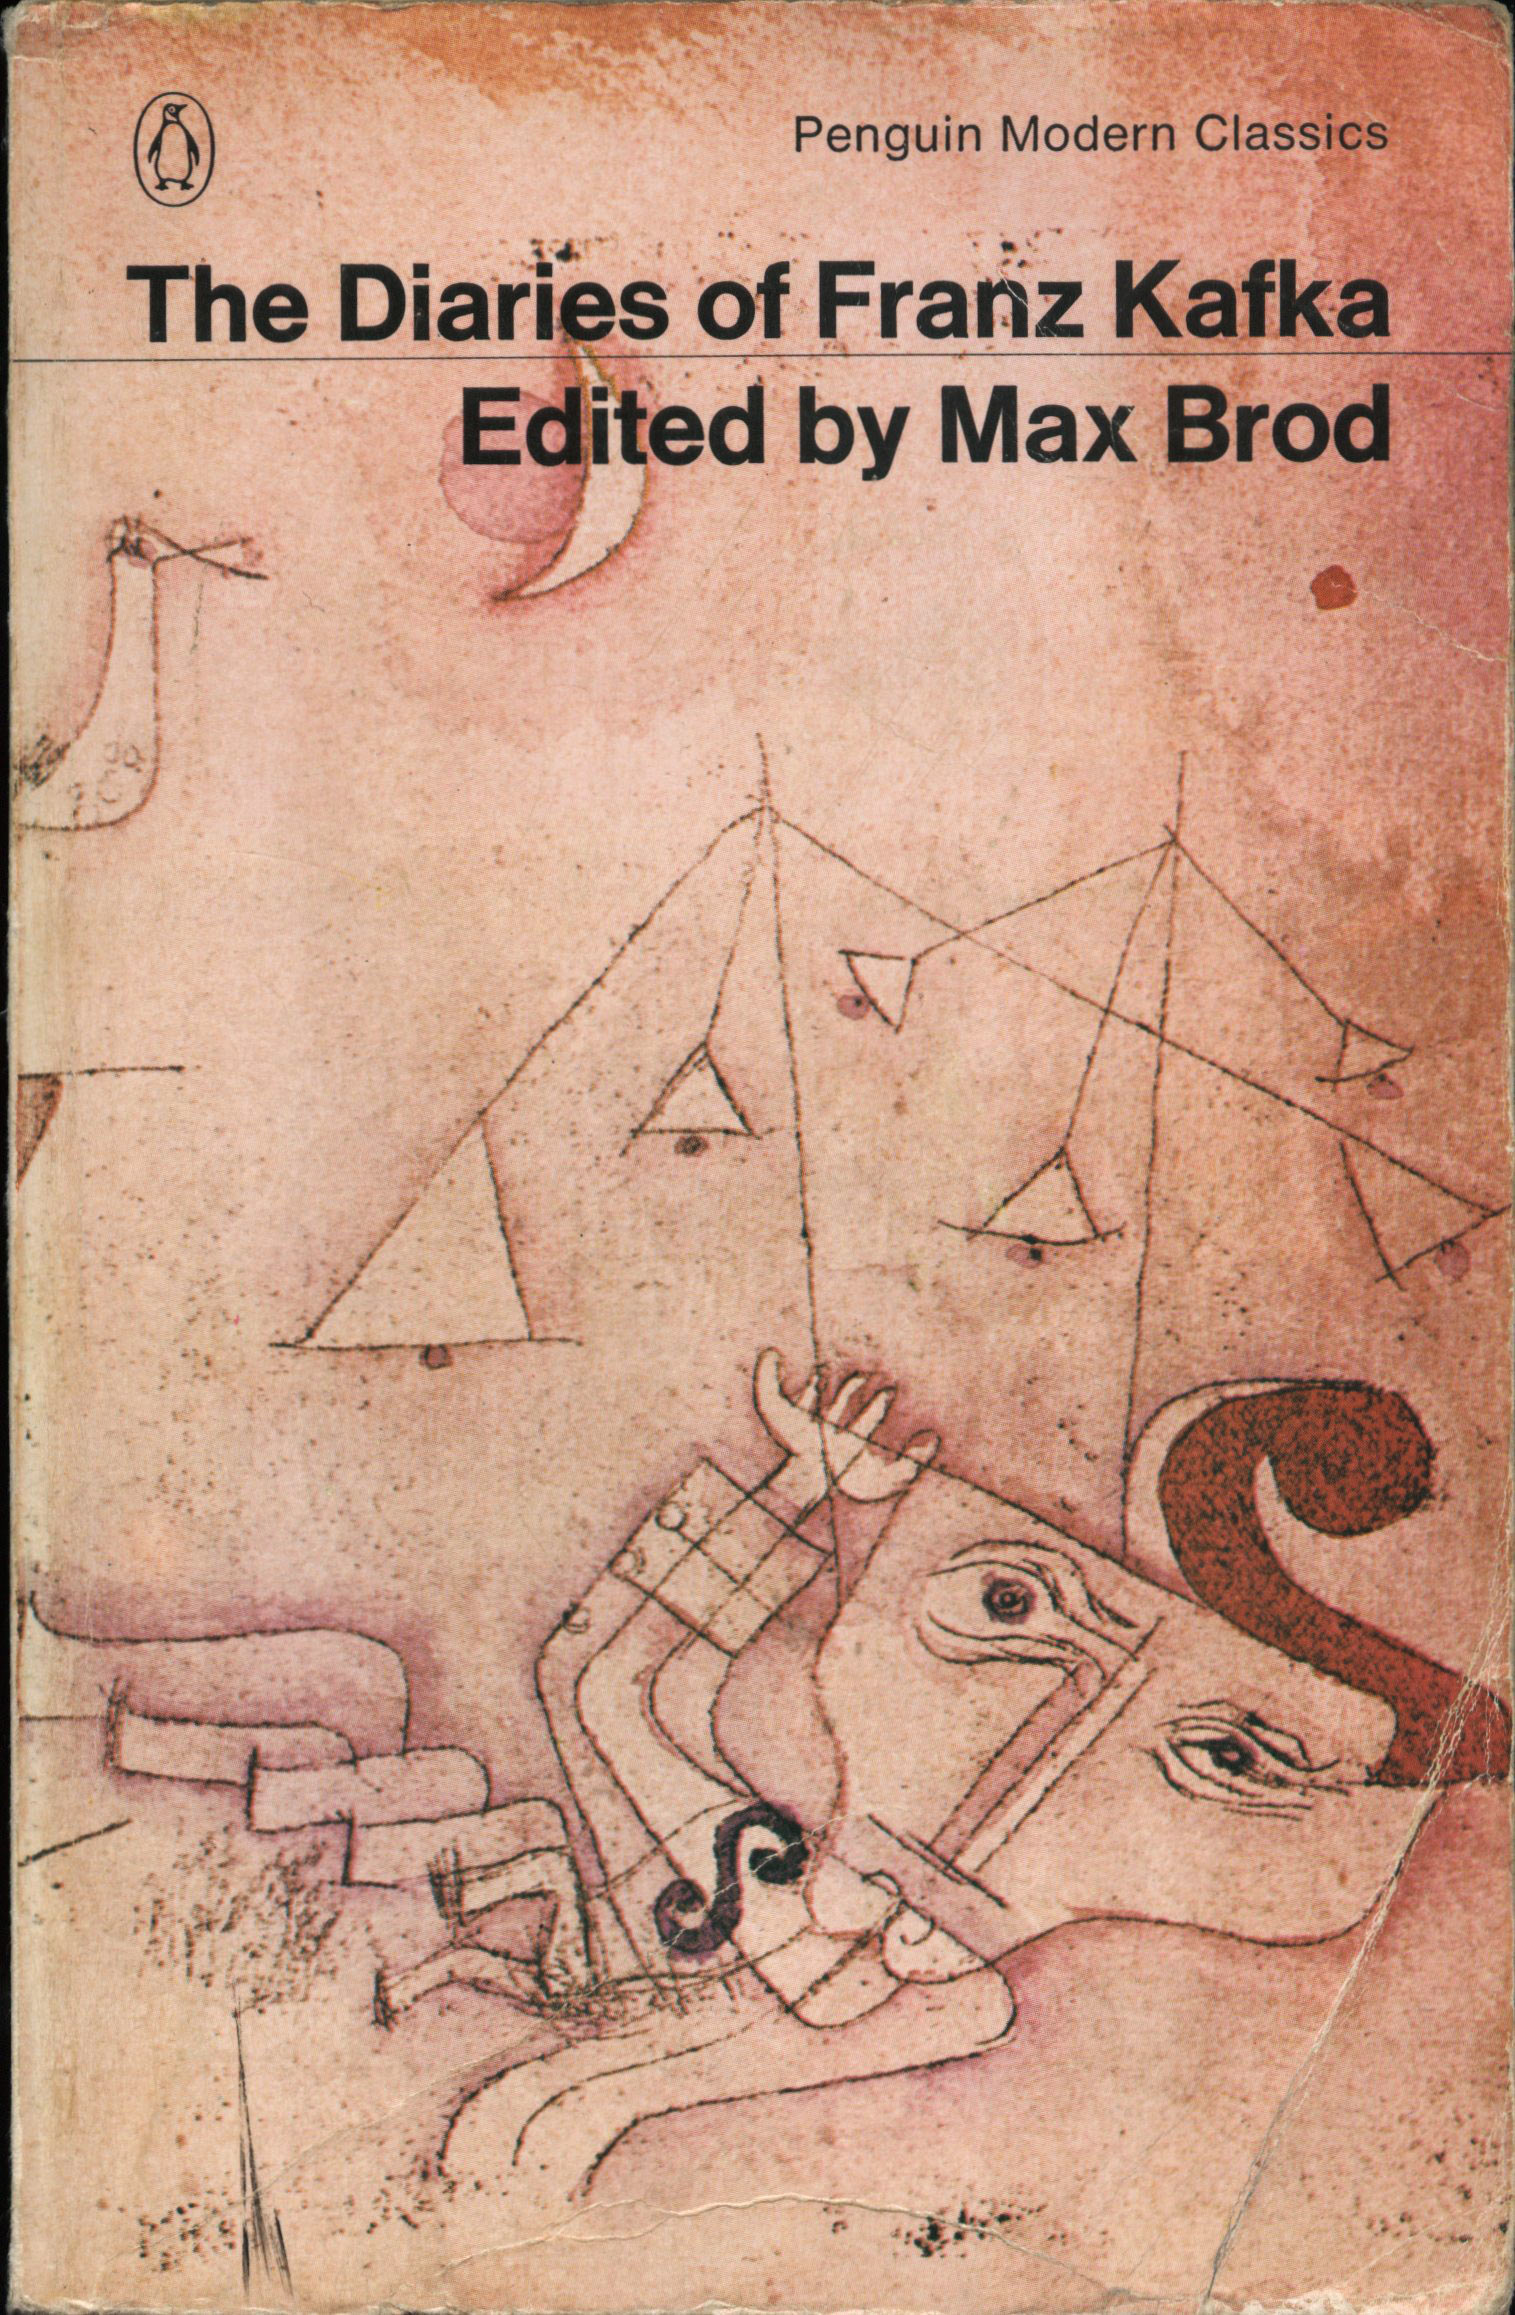 Kafka’s diaries, 1964 edition. Max Brod published the diaries in 1949